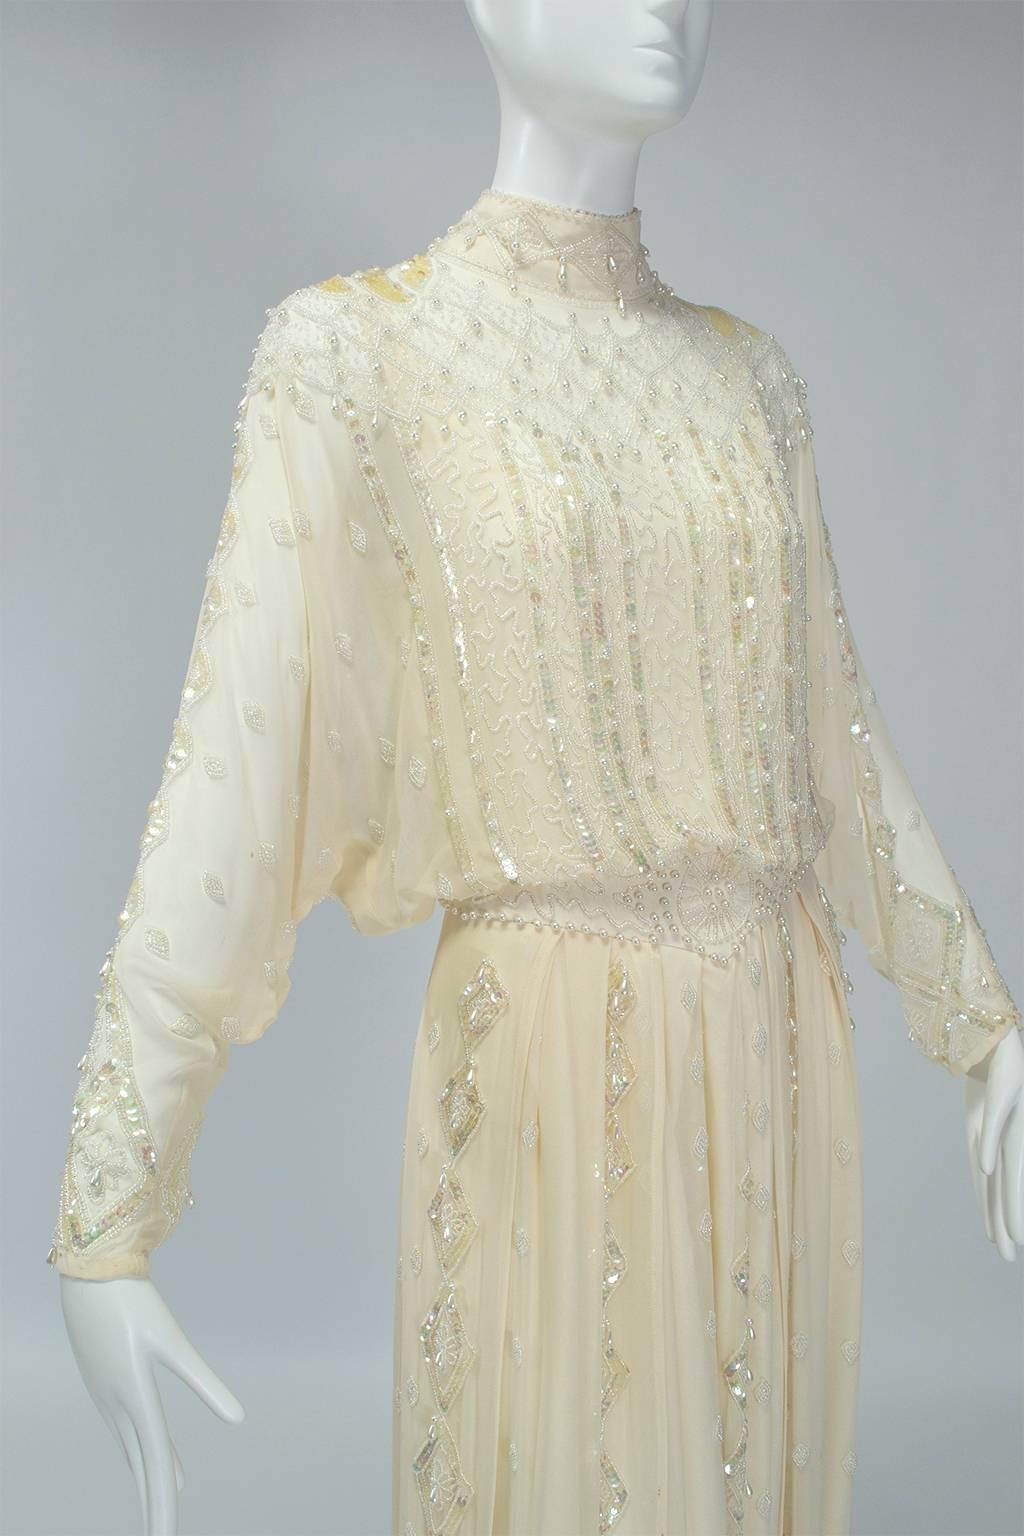 Beige Ivory Edwardian Reproduction Ornamented Silk Tea or Bridal Gown - Small, 1980s